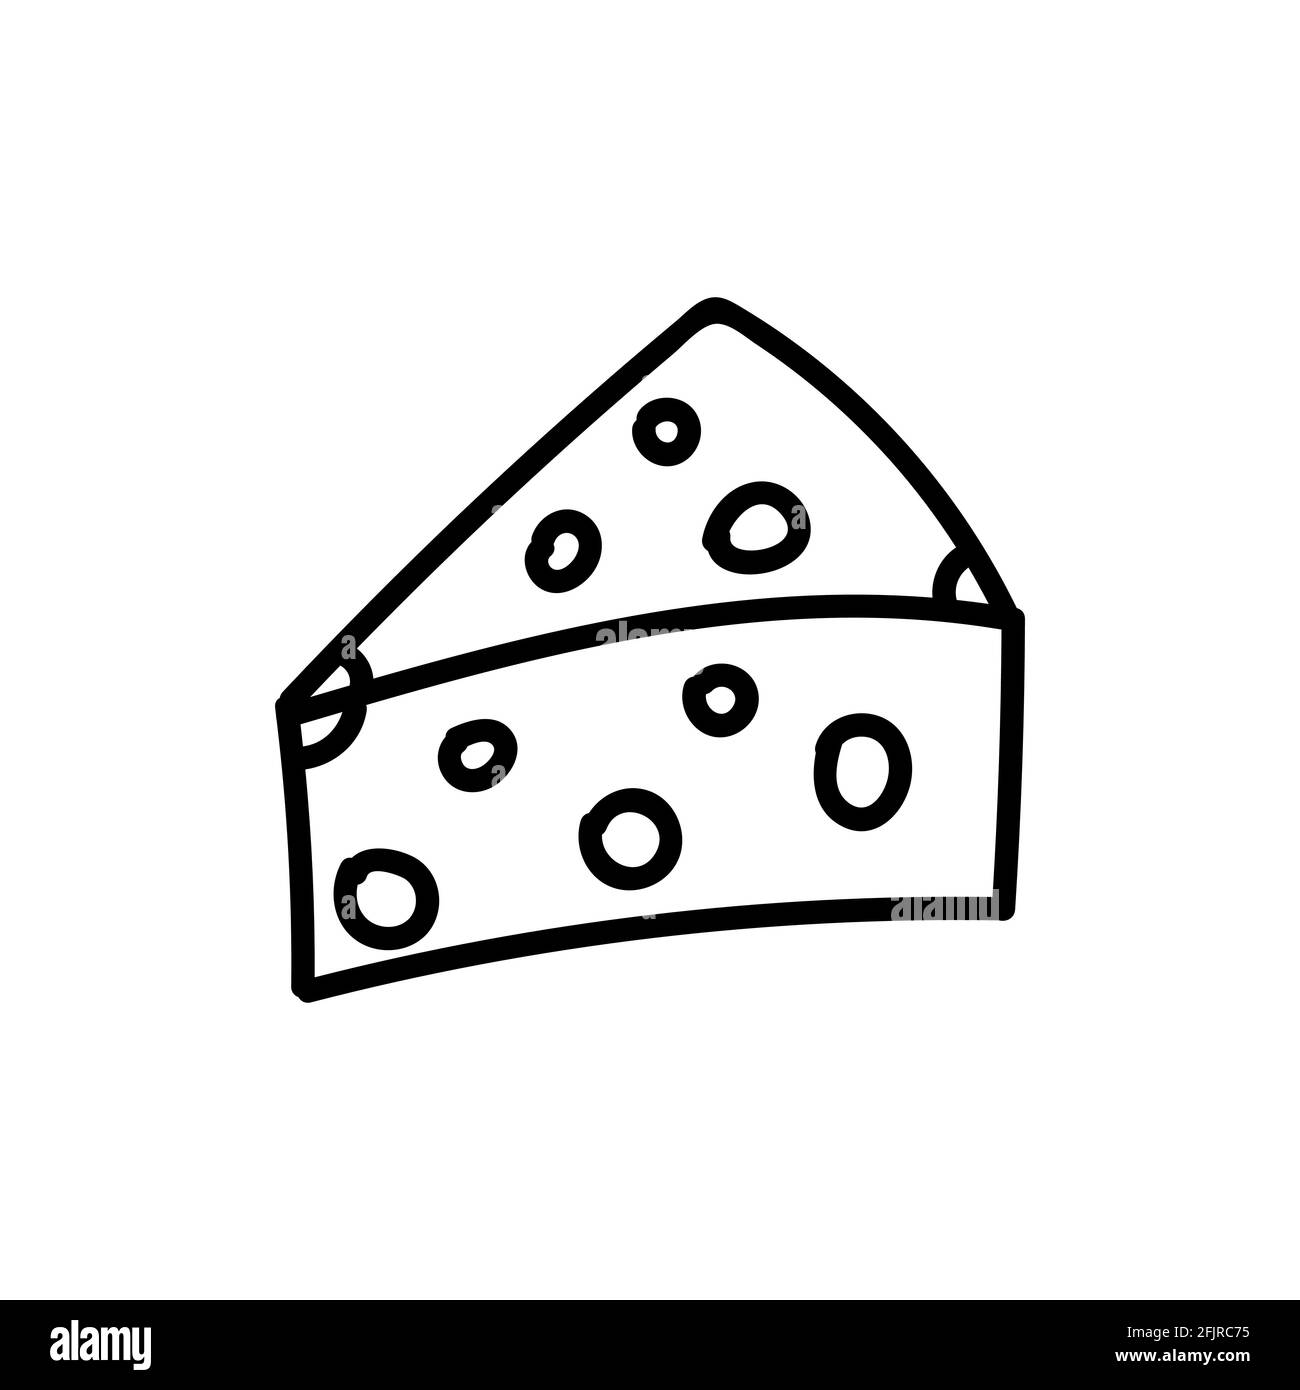 Cheese with holes. Hand drawn doodle vector illustration isolated on whithe background. Simple drawings with black color. Stock Vector